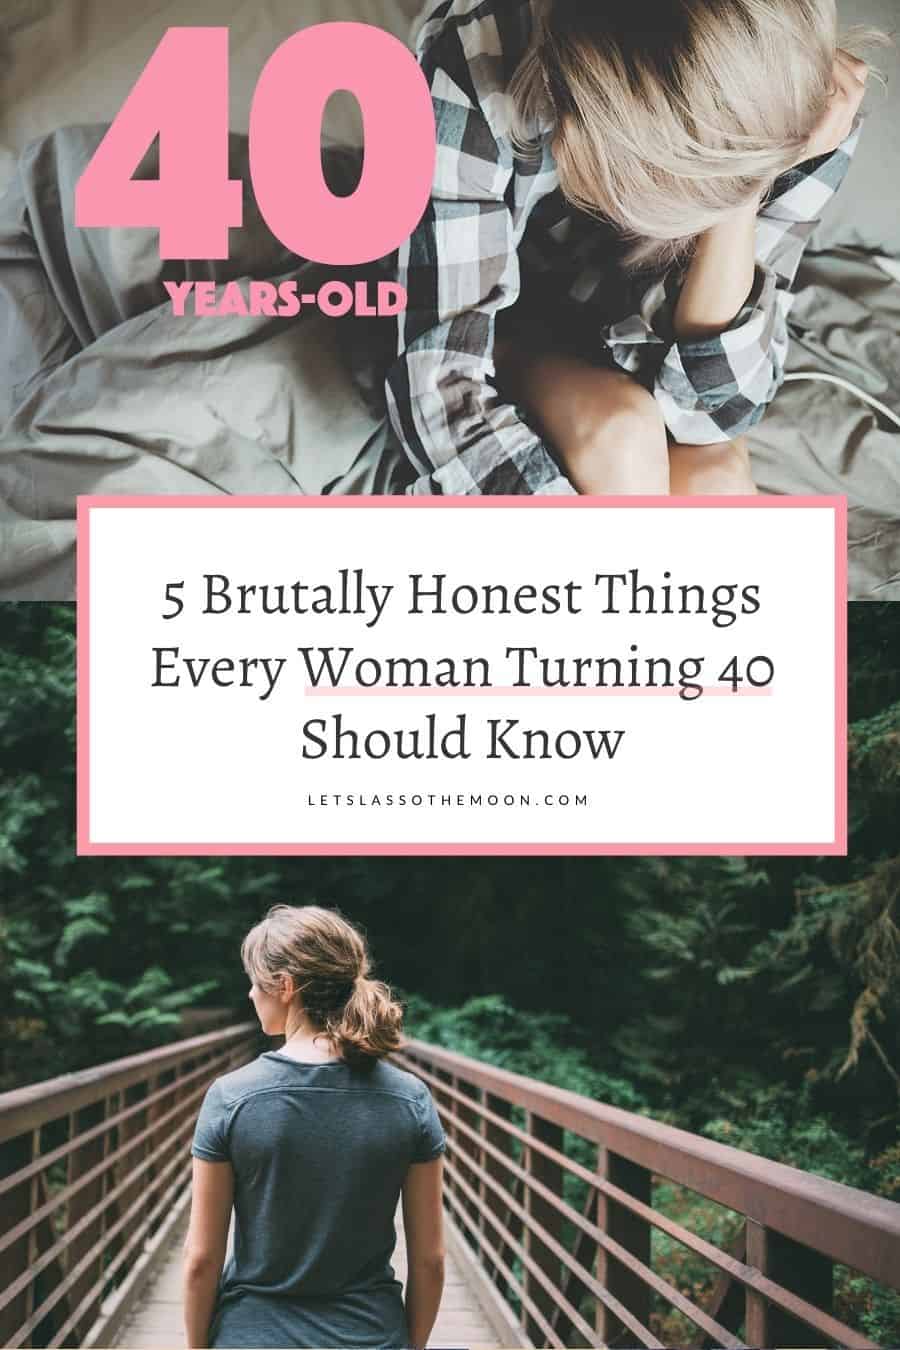 A collage with a woman sitting in a bed wearning a flannel and another of a woman crossing a bridge. Overtop a title reads, "5 Brutally Honest Things Every Woman Turning 40 Should Know."